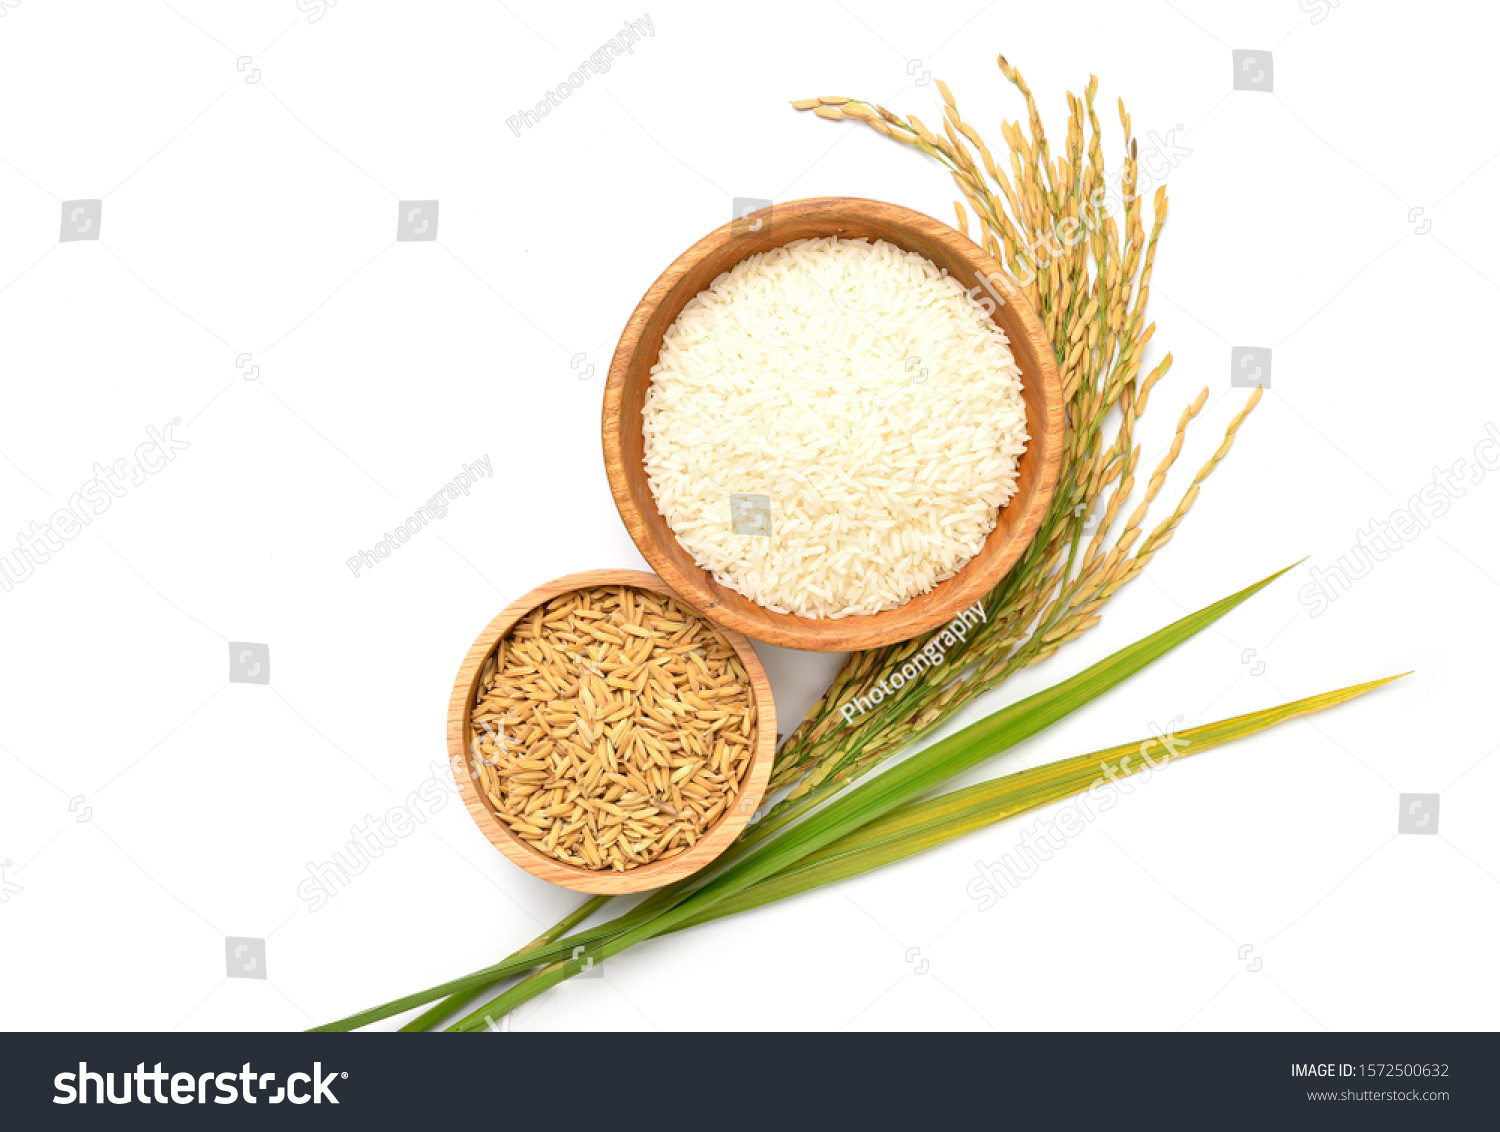 Flat lay (Top view) of white rice and paddy rice in wooden bowl with paddy rice ears and green blades isolated on white background. #1572500632